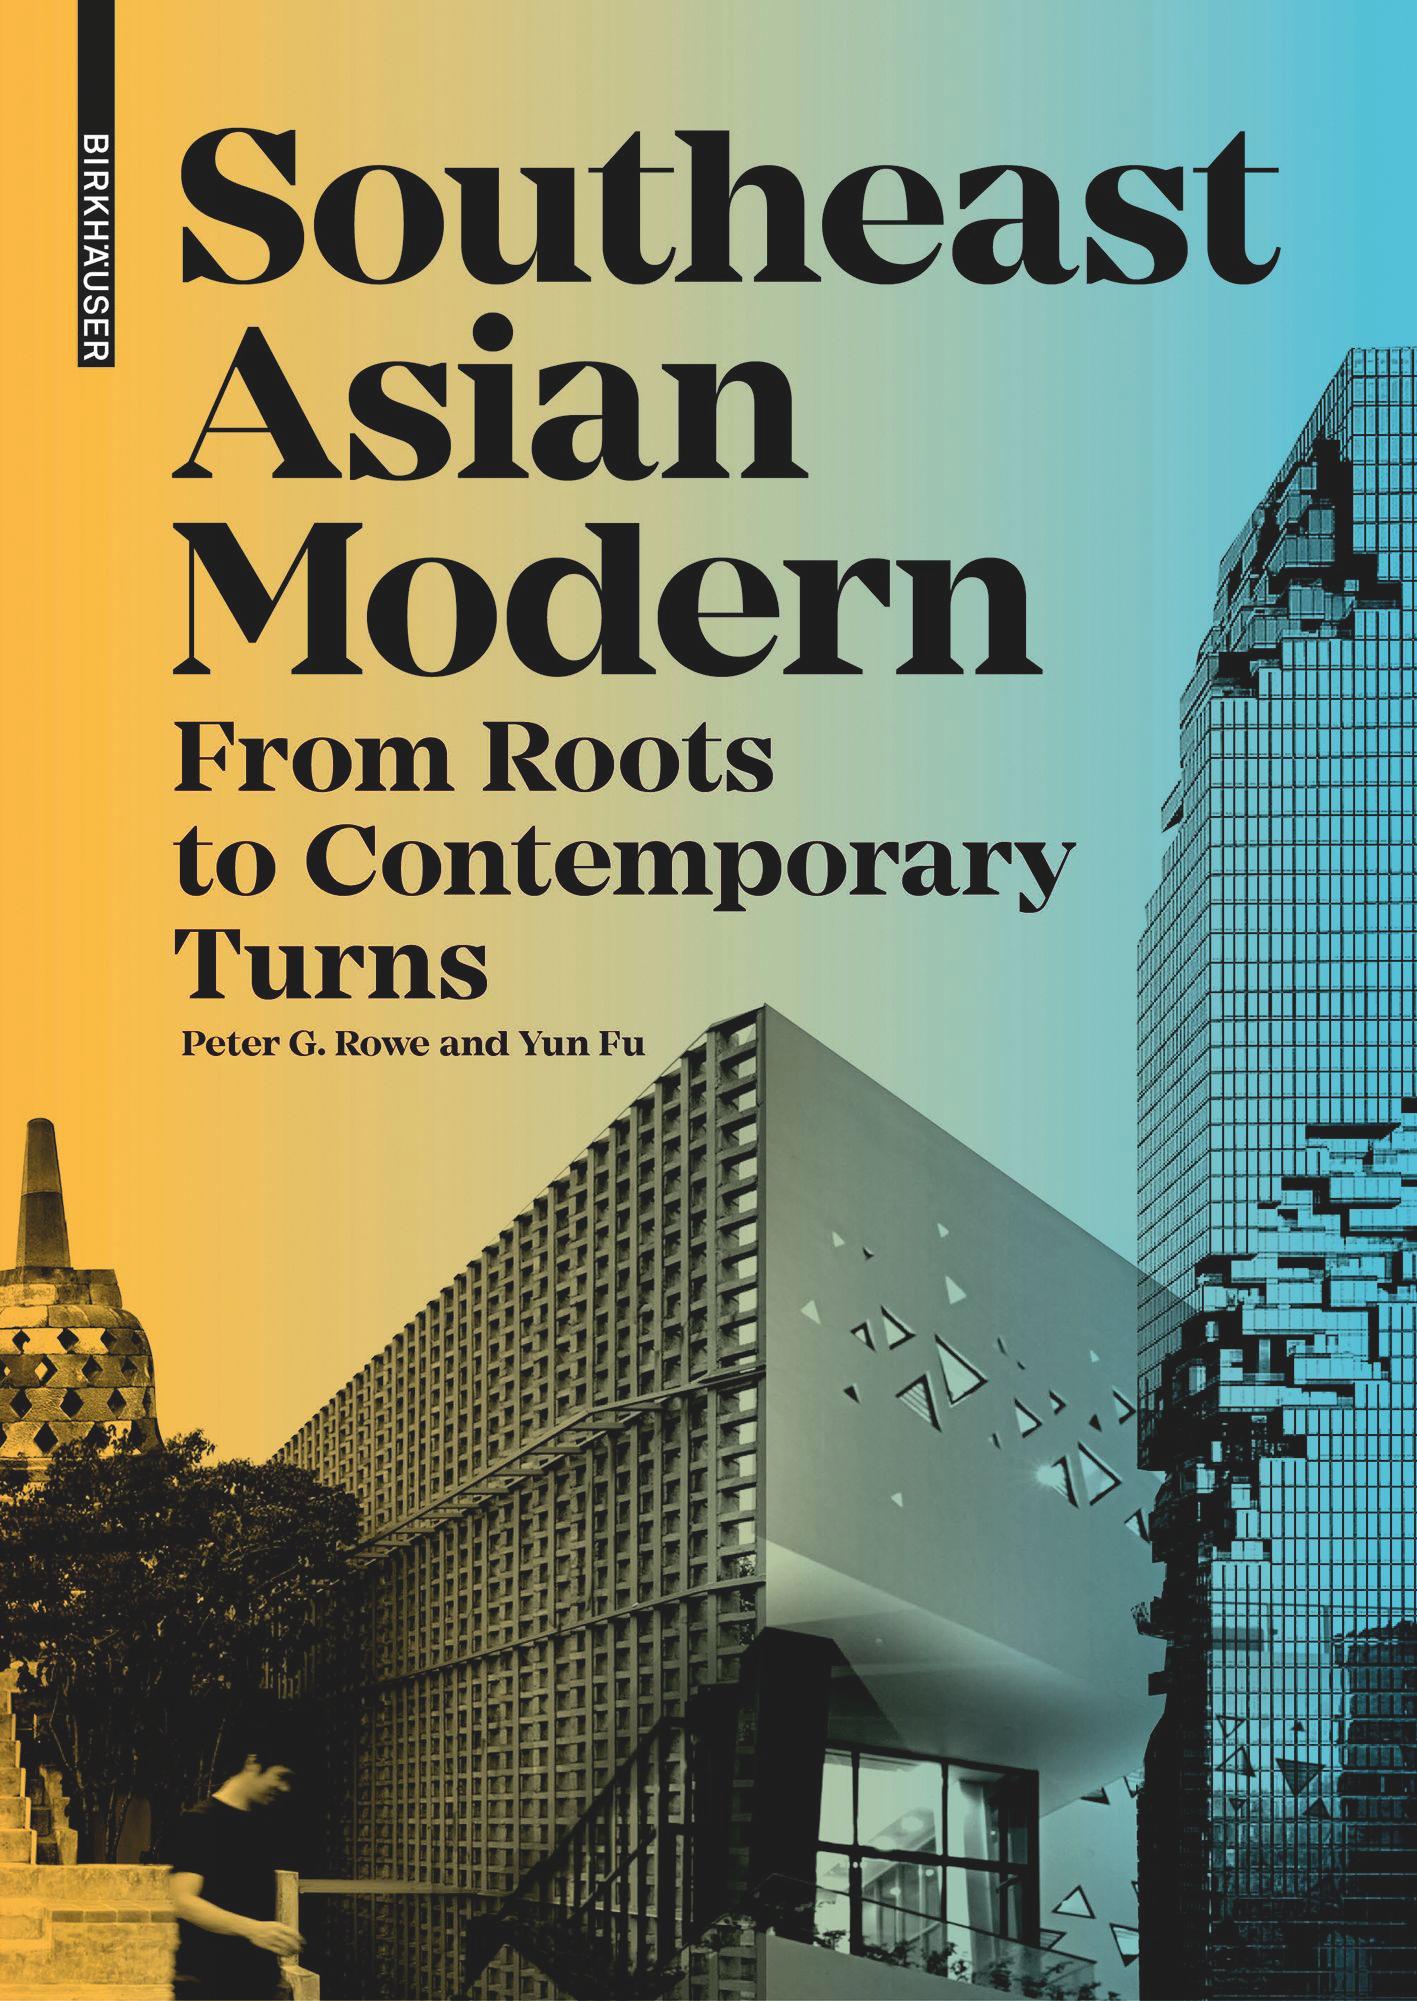 Southeast Asian Modern's cover